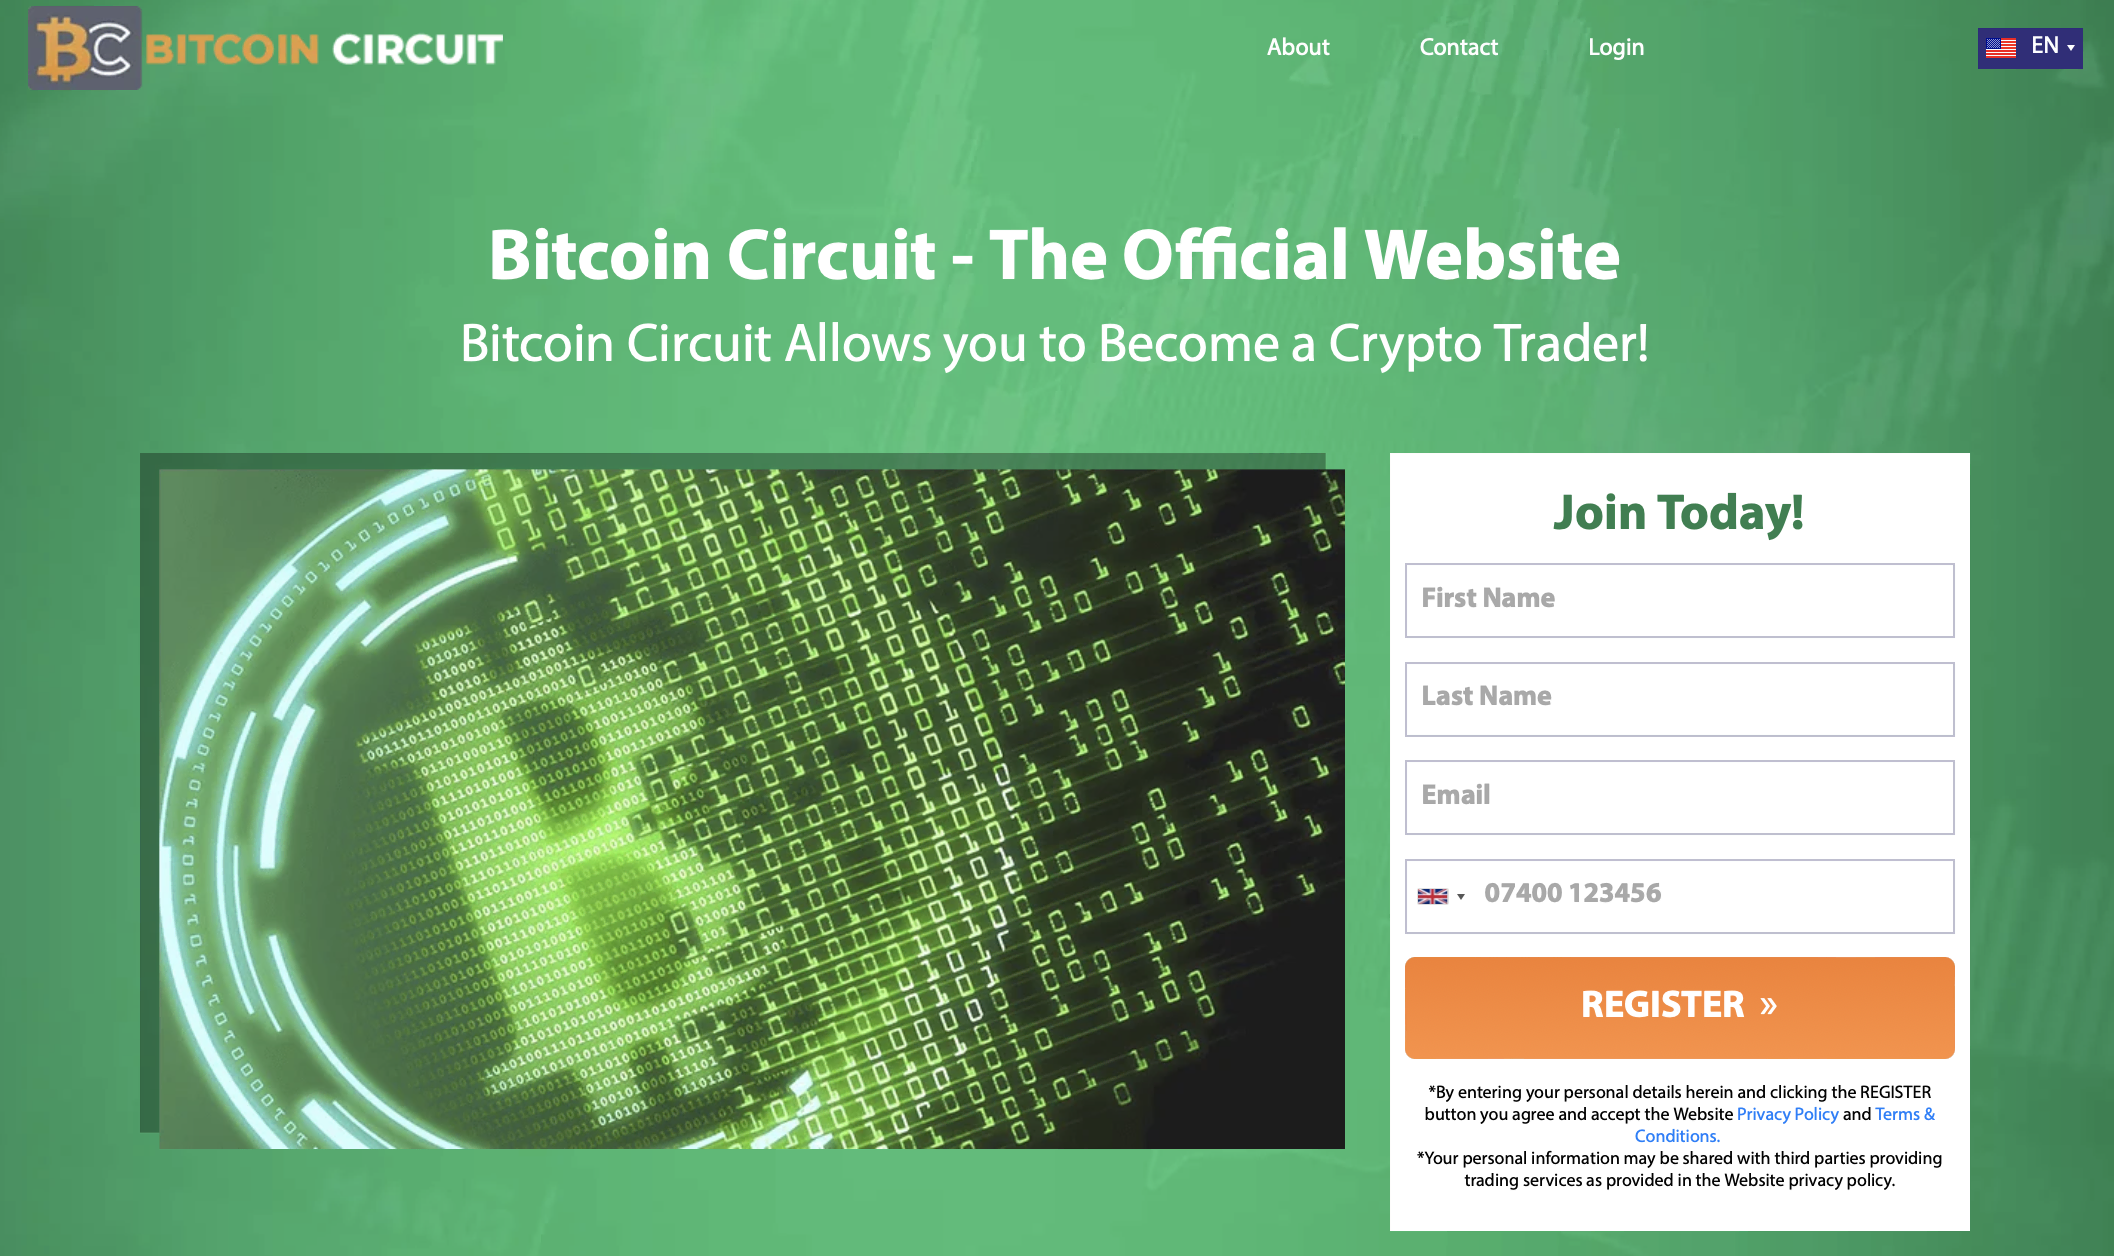 The official website of Bitcoin Circuit